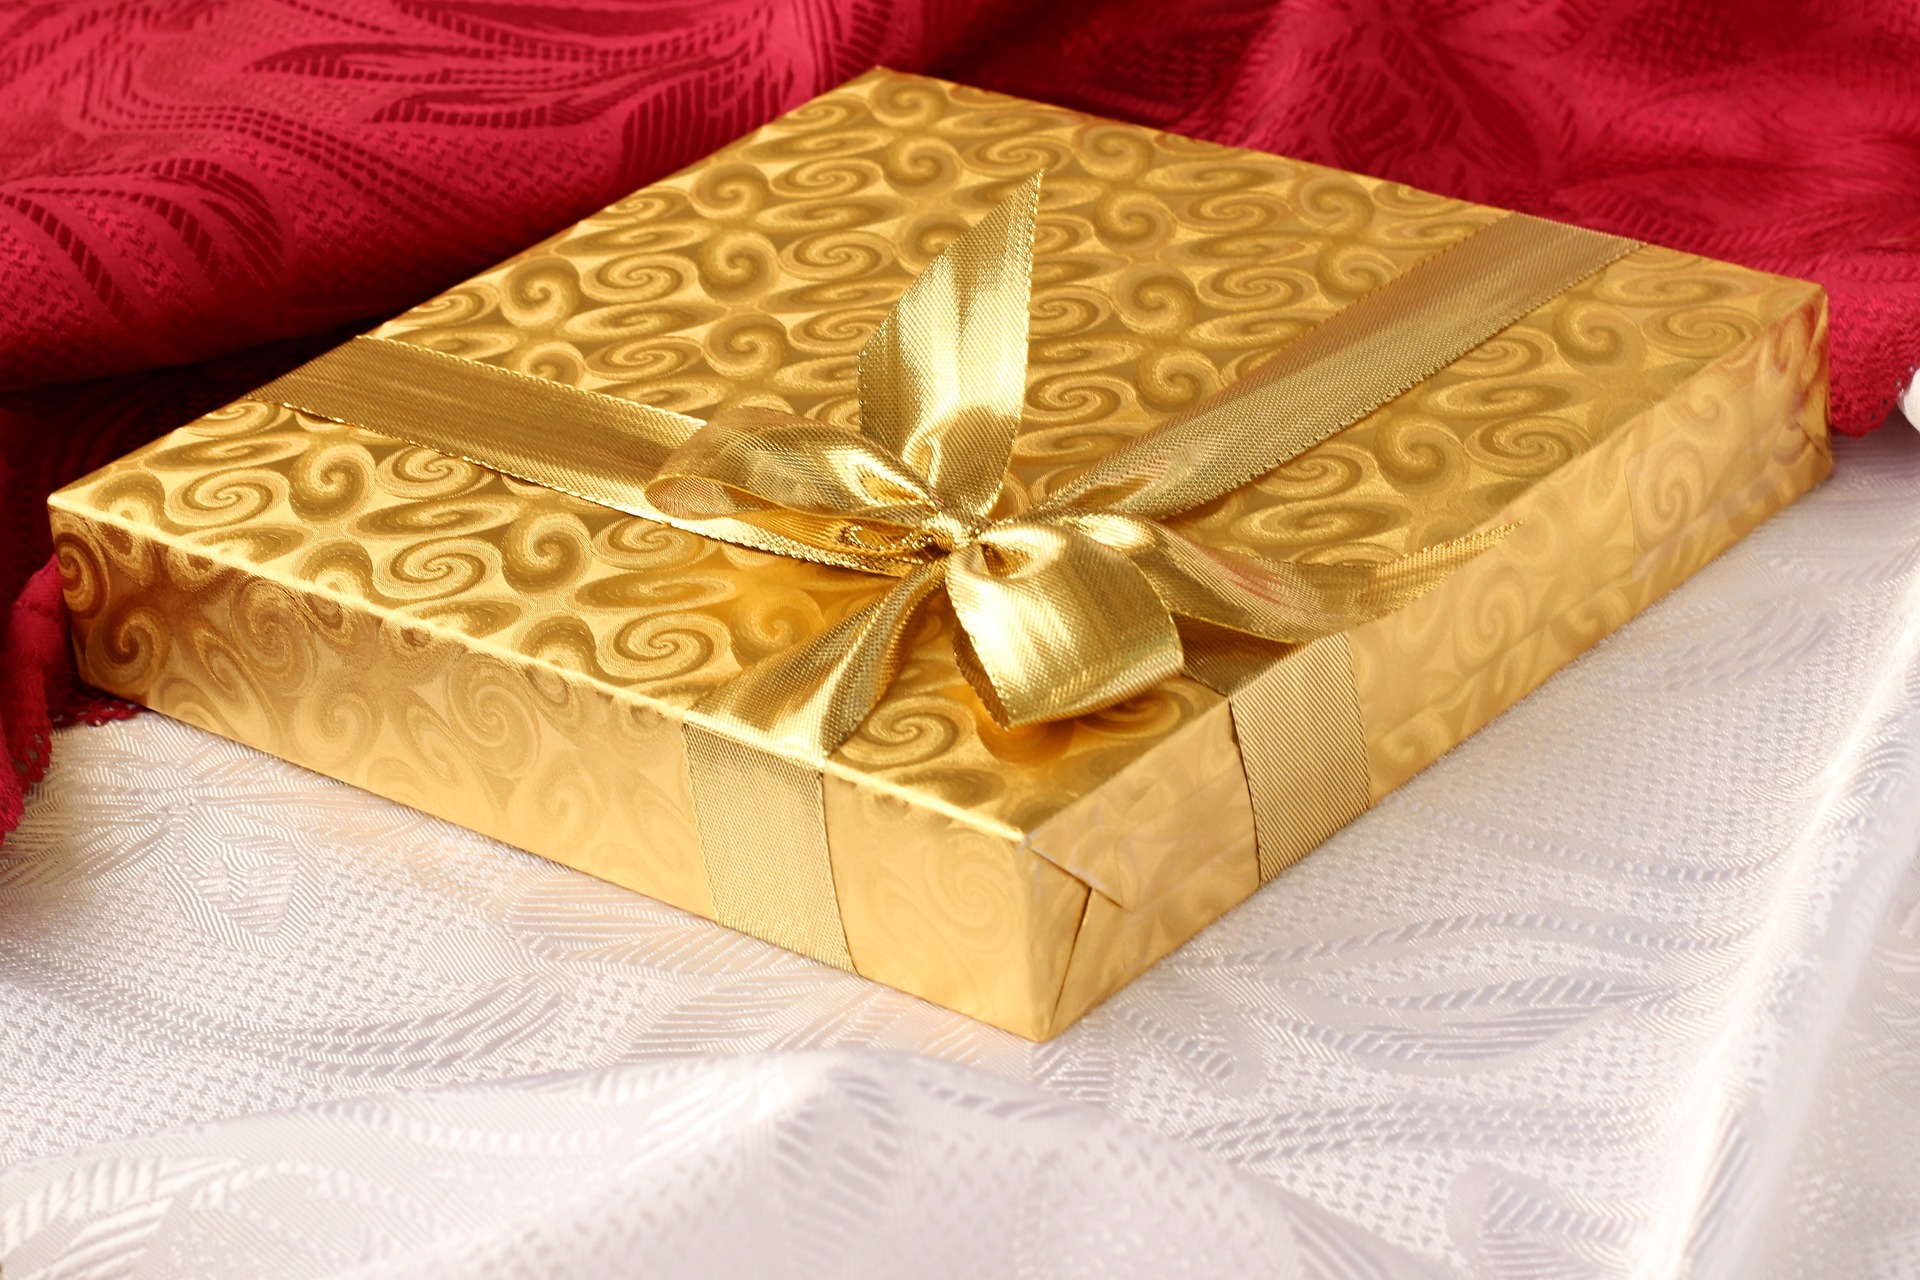 happy holidays 2015 picture of gift wrapped in gold wrapping paper